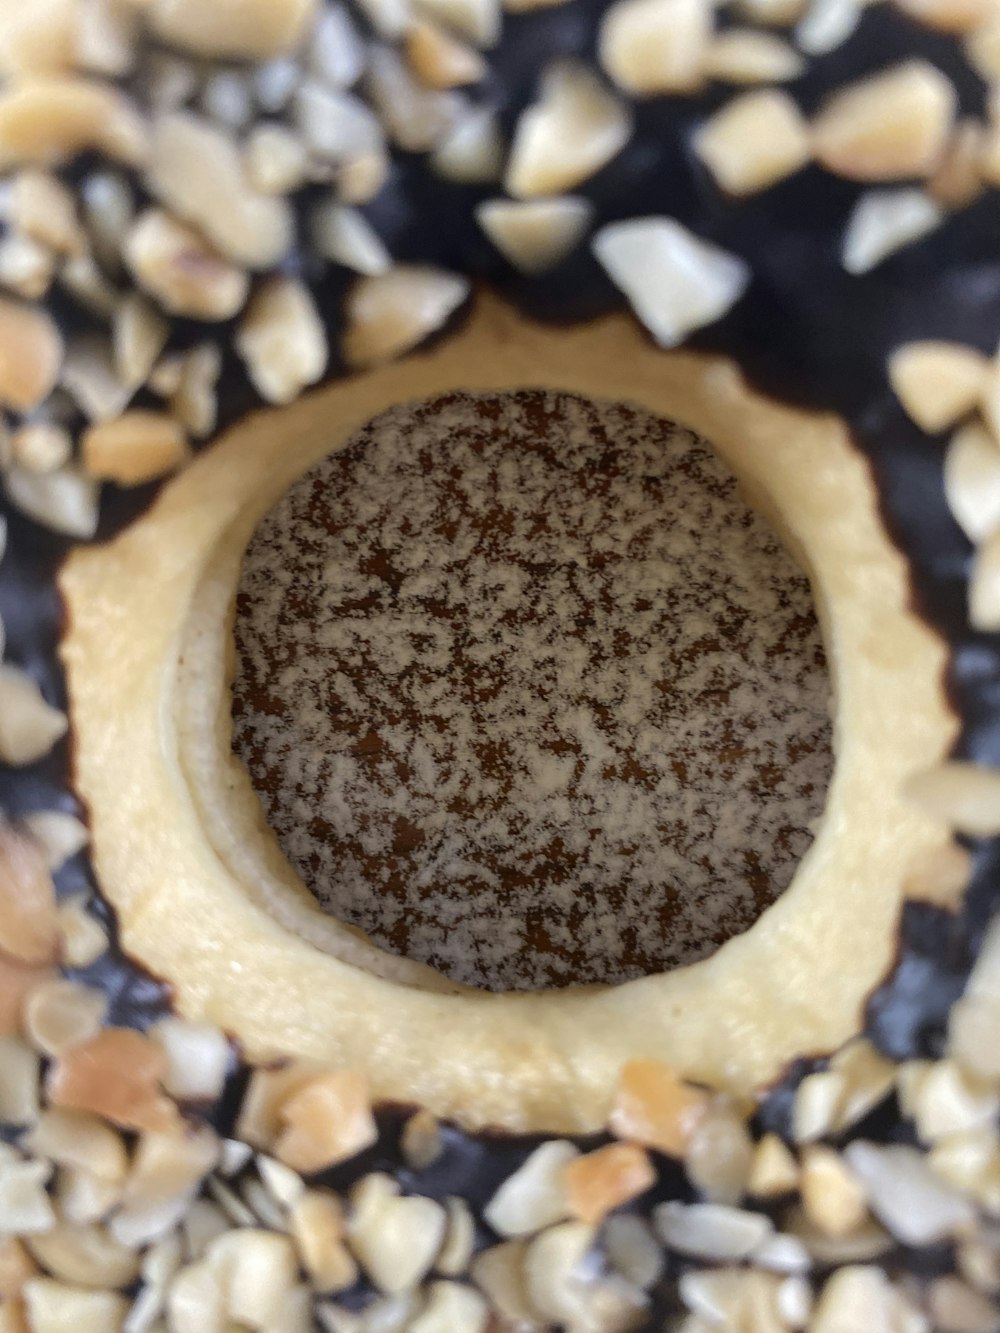 a close up of a doughnut with nuts on it